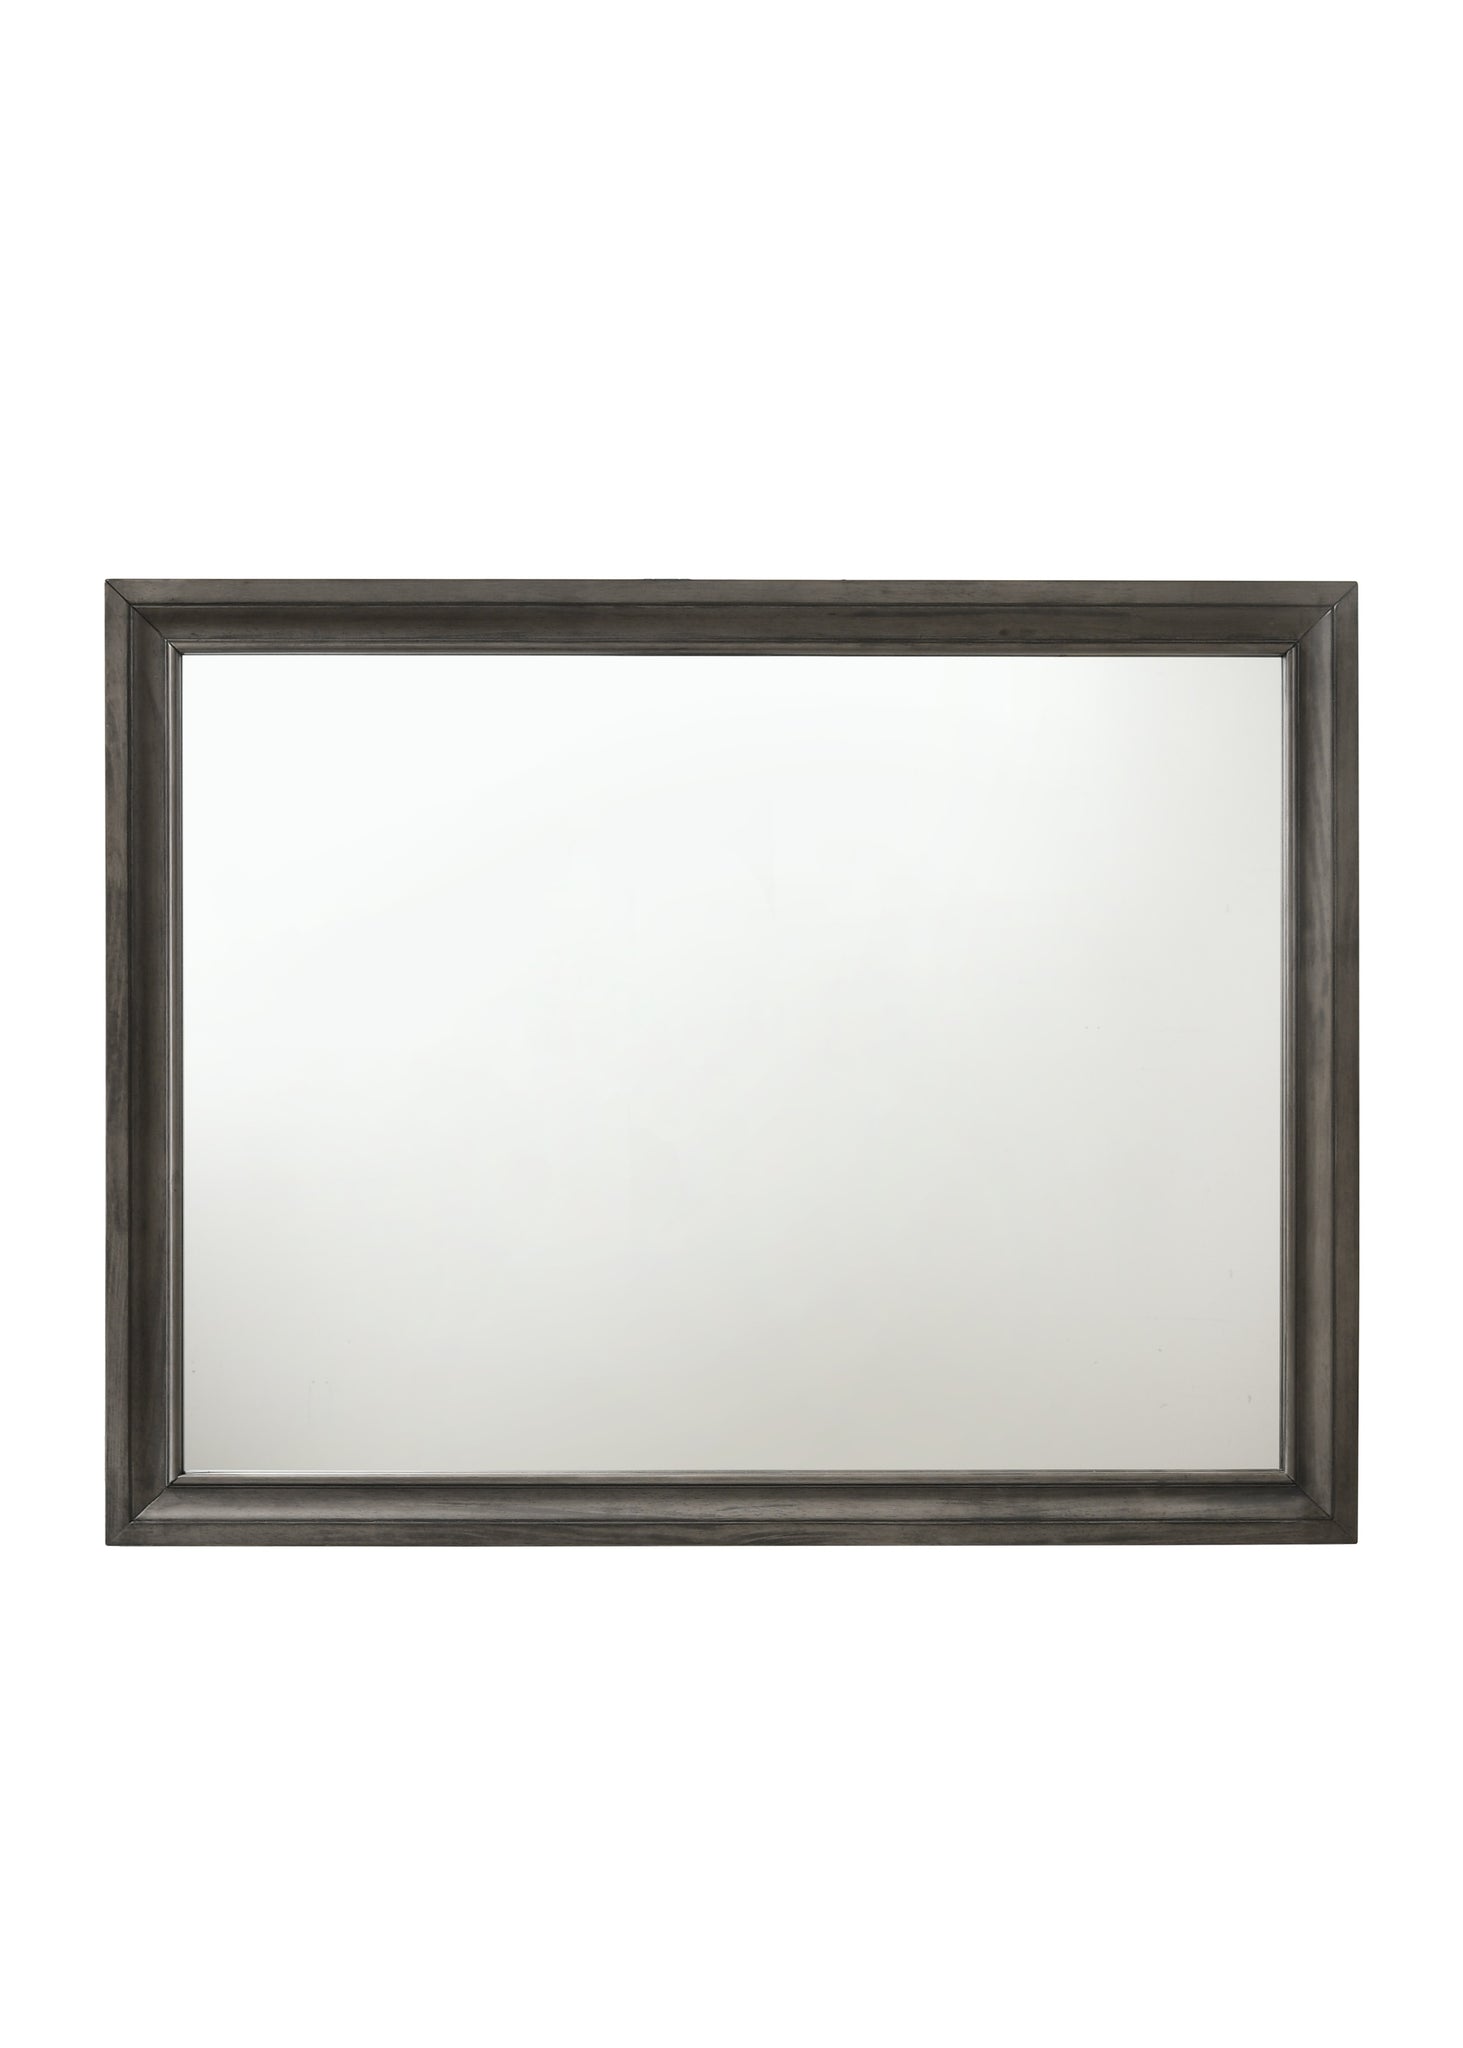 Transitional Style Wooden Decorative Mirror with